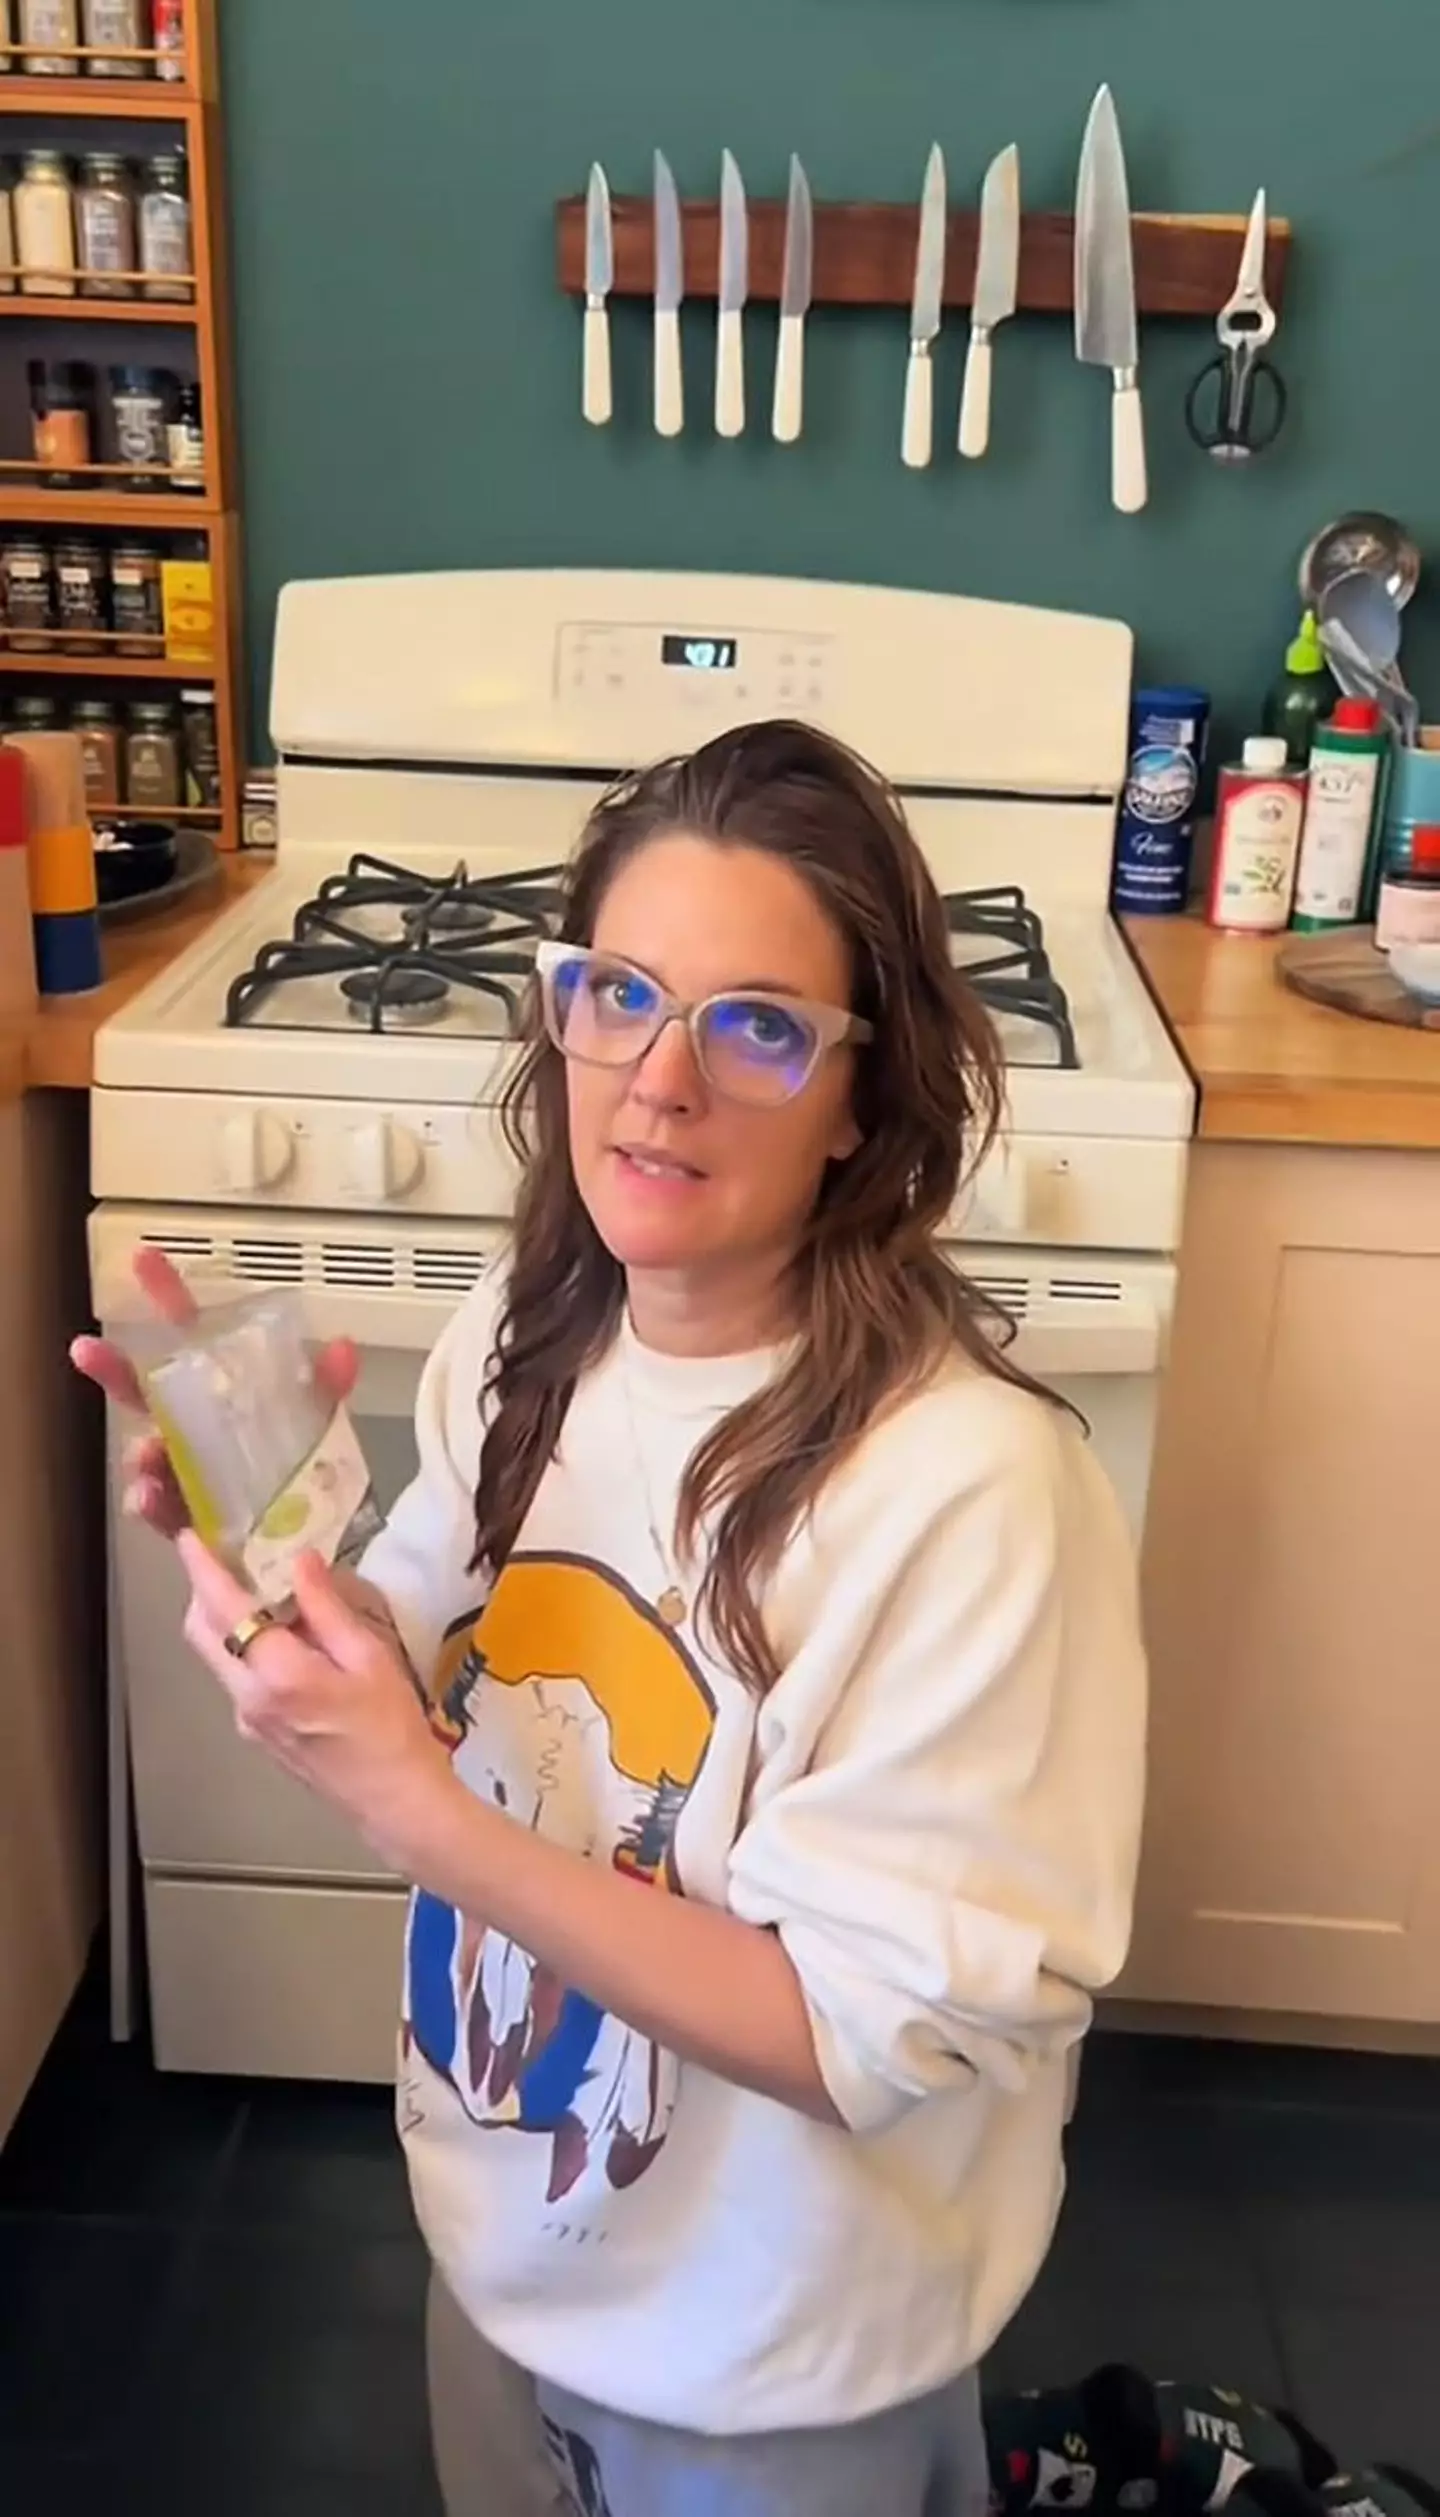 Fans were impressed with the stove. (TikTok / @drewbarrymore)